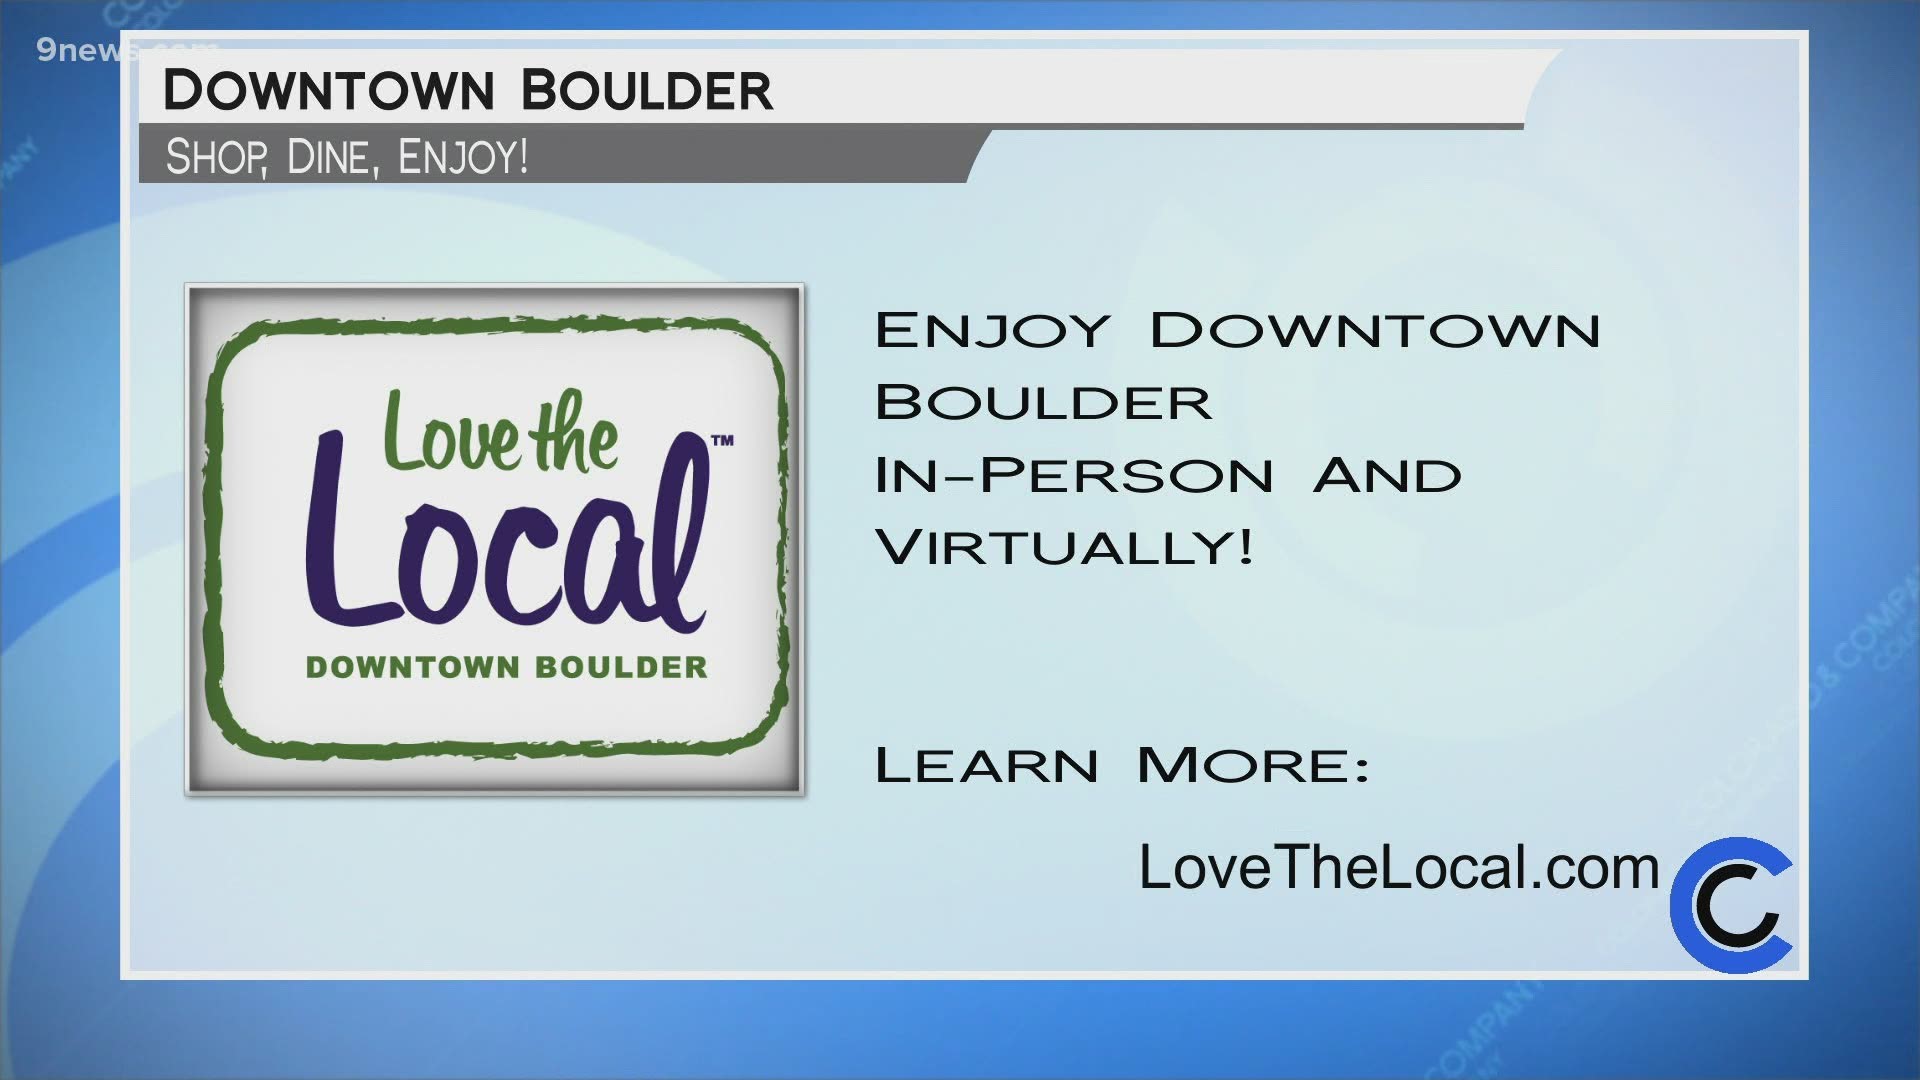 Small businesses need your support more than ever. Visit LoveTheLocal.com to find out about unique dining, shopping and more in Downtown Boulder.